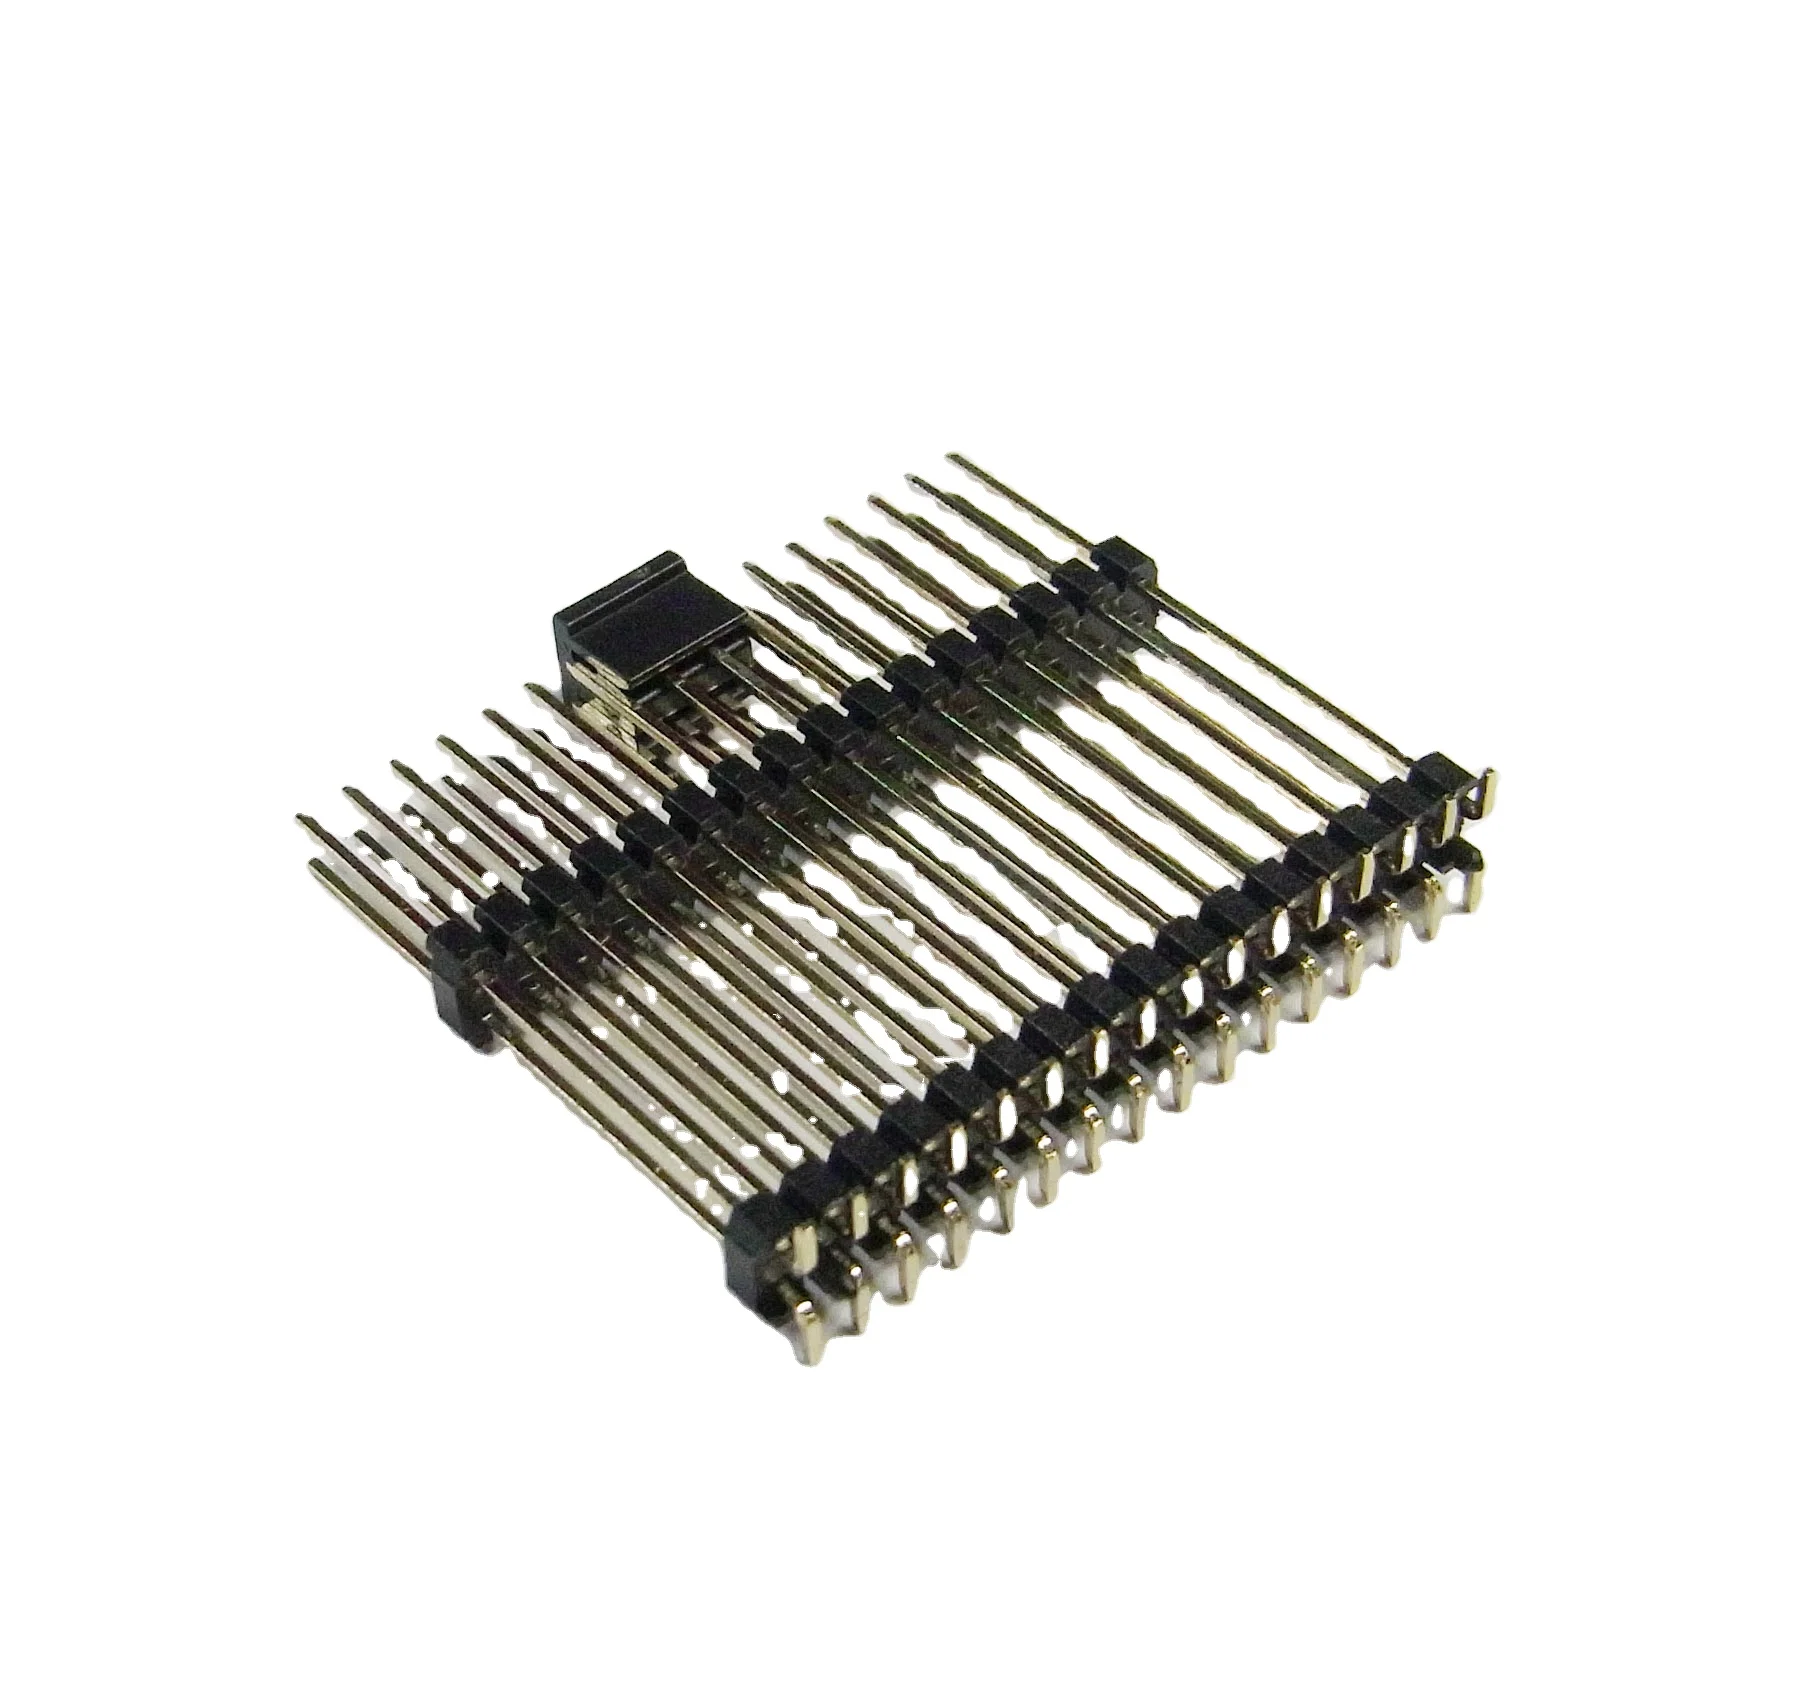 Hot sale high insulator profile 2.0 mm pitch OEM double layer male pin header connector (1600264007237)